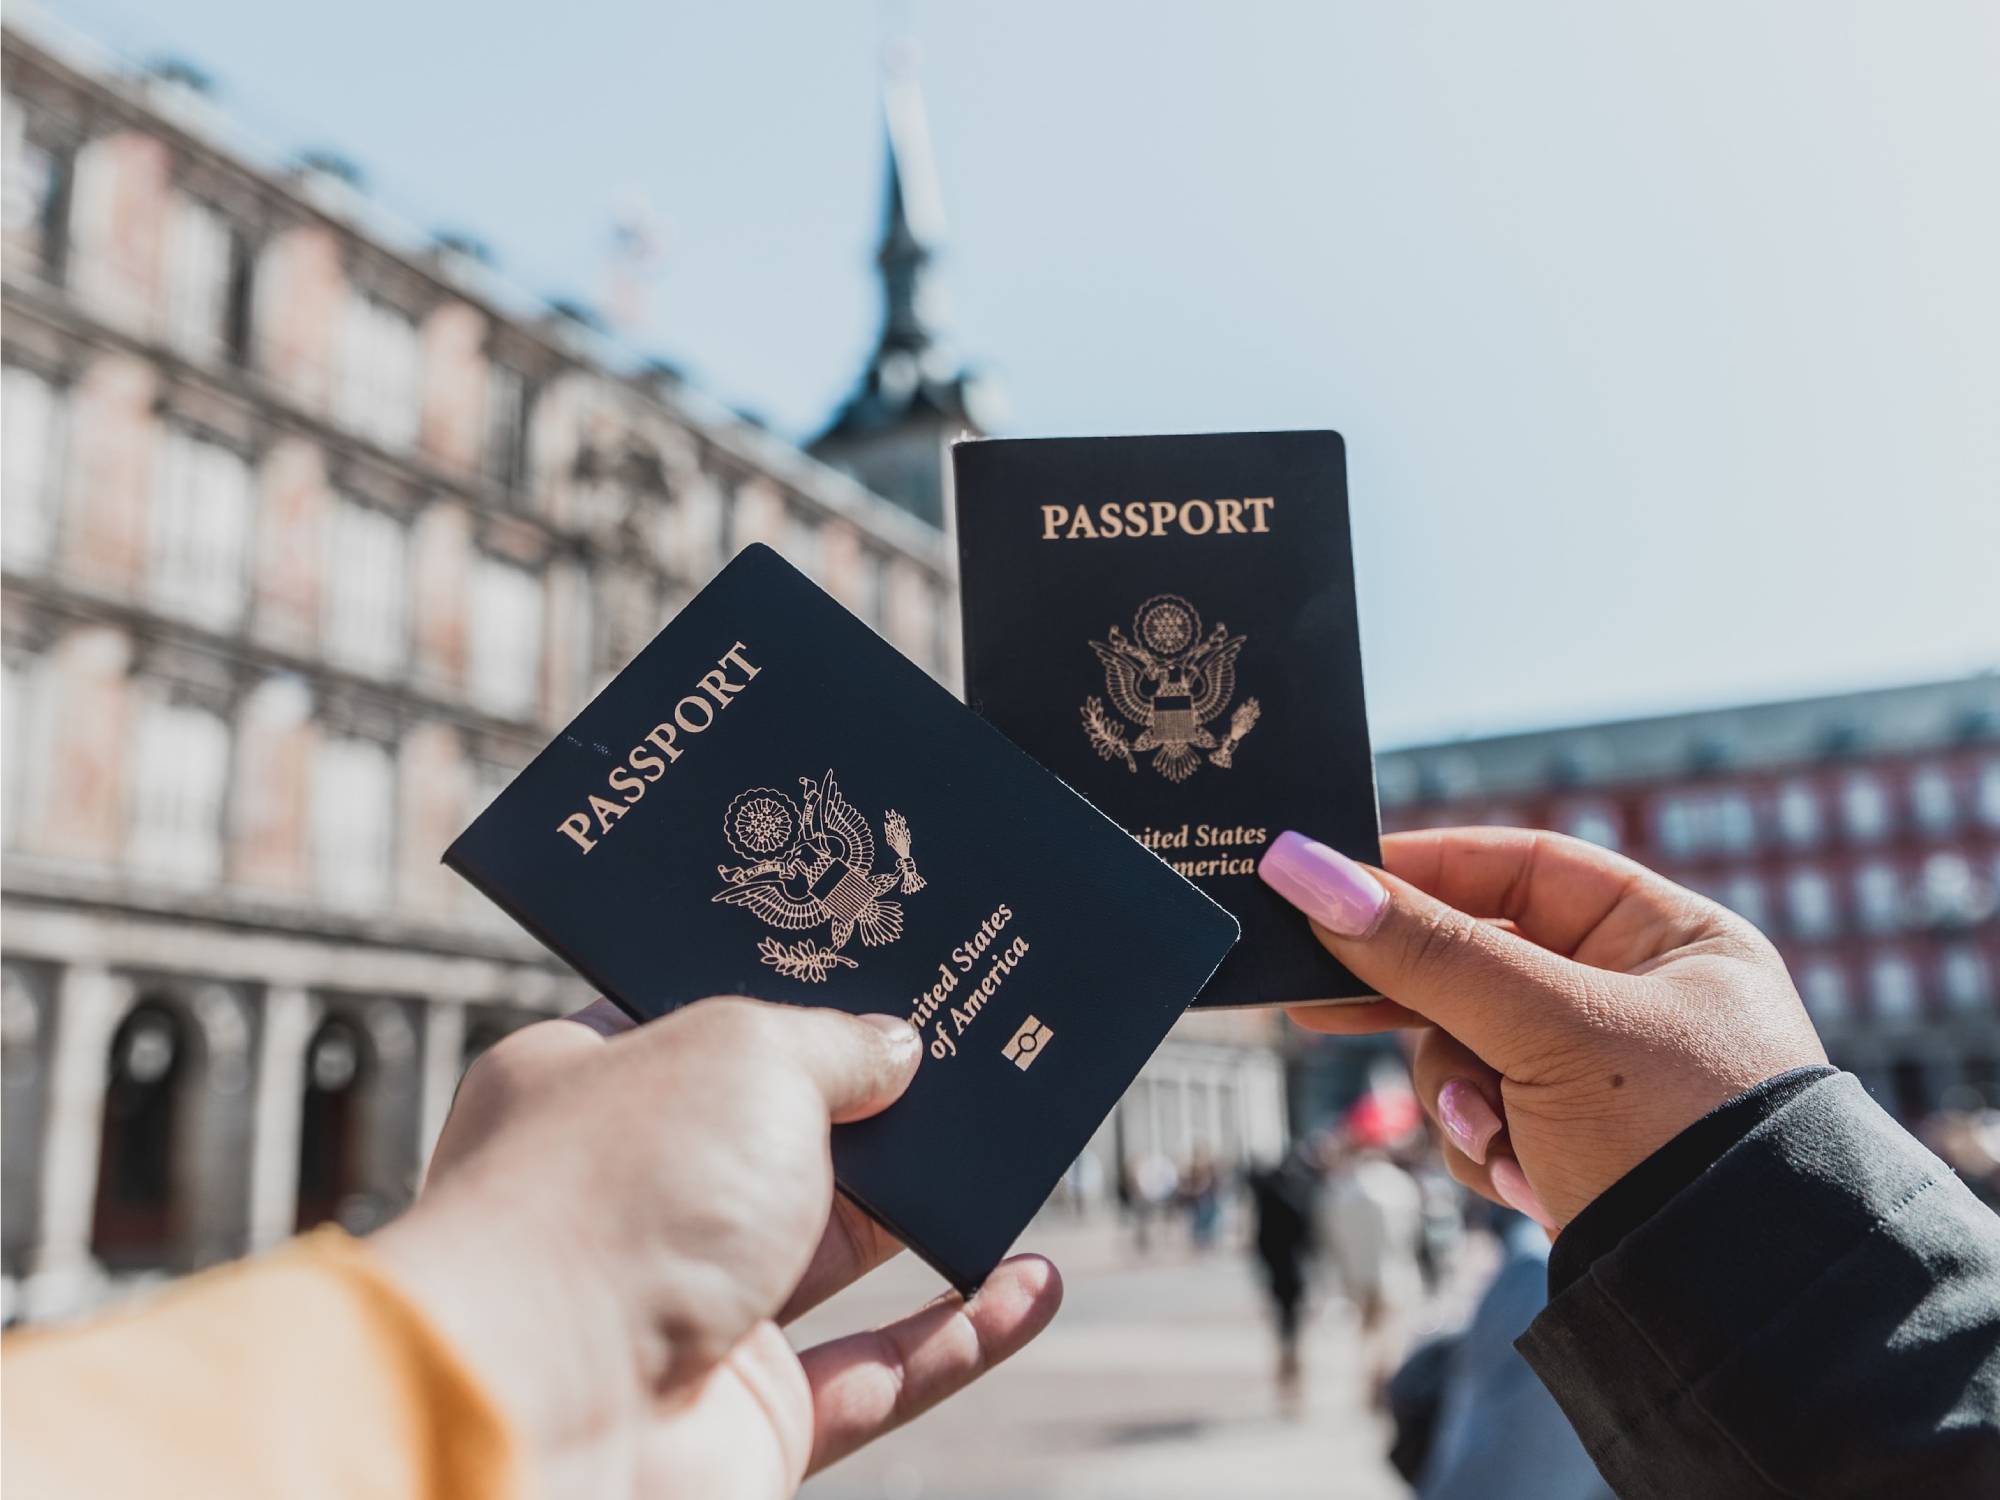 8 things you need to know before traveling international for the first time